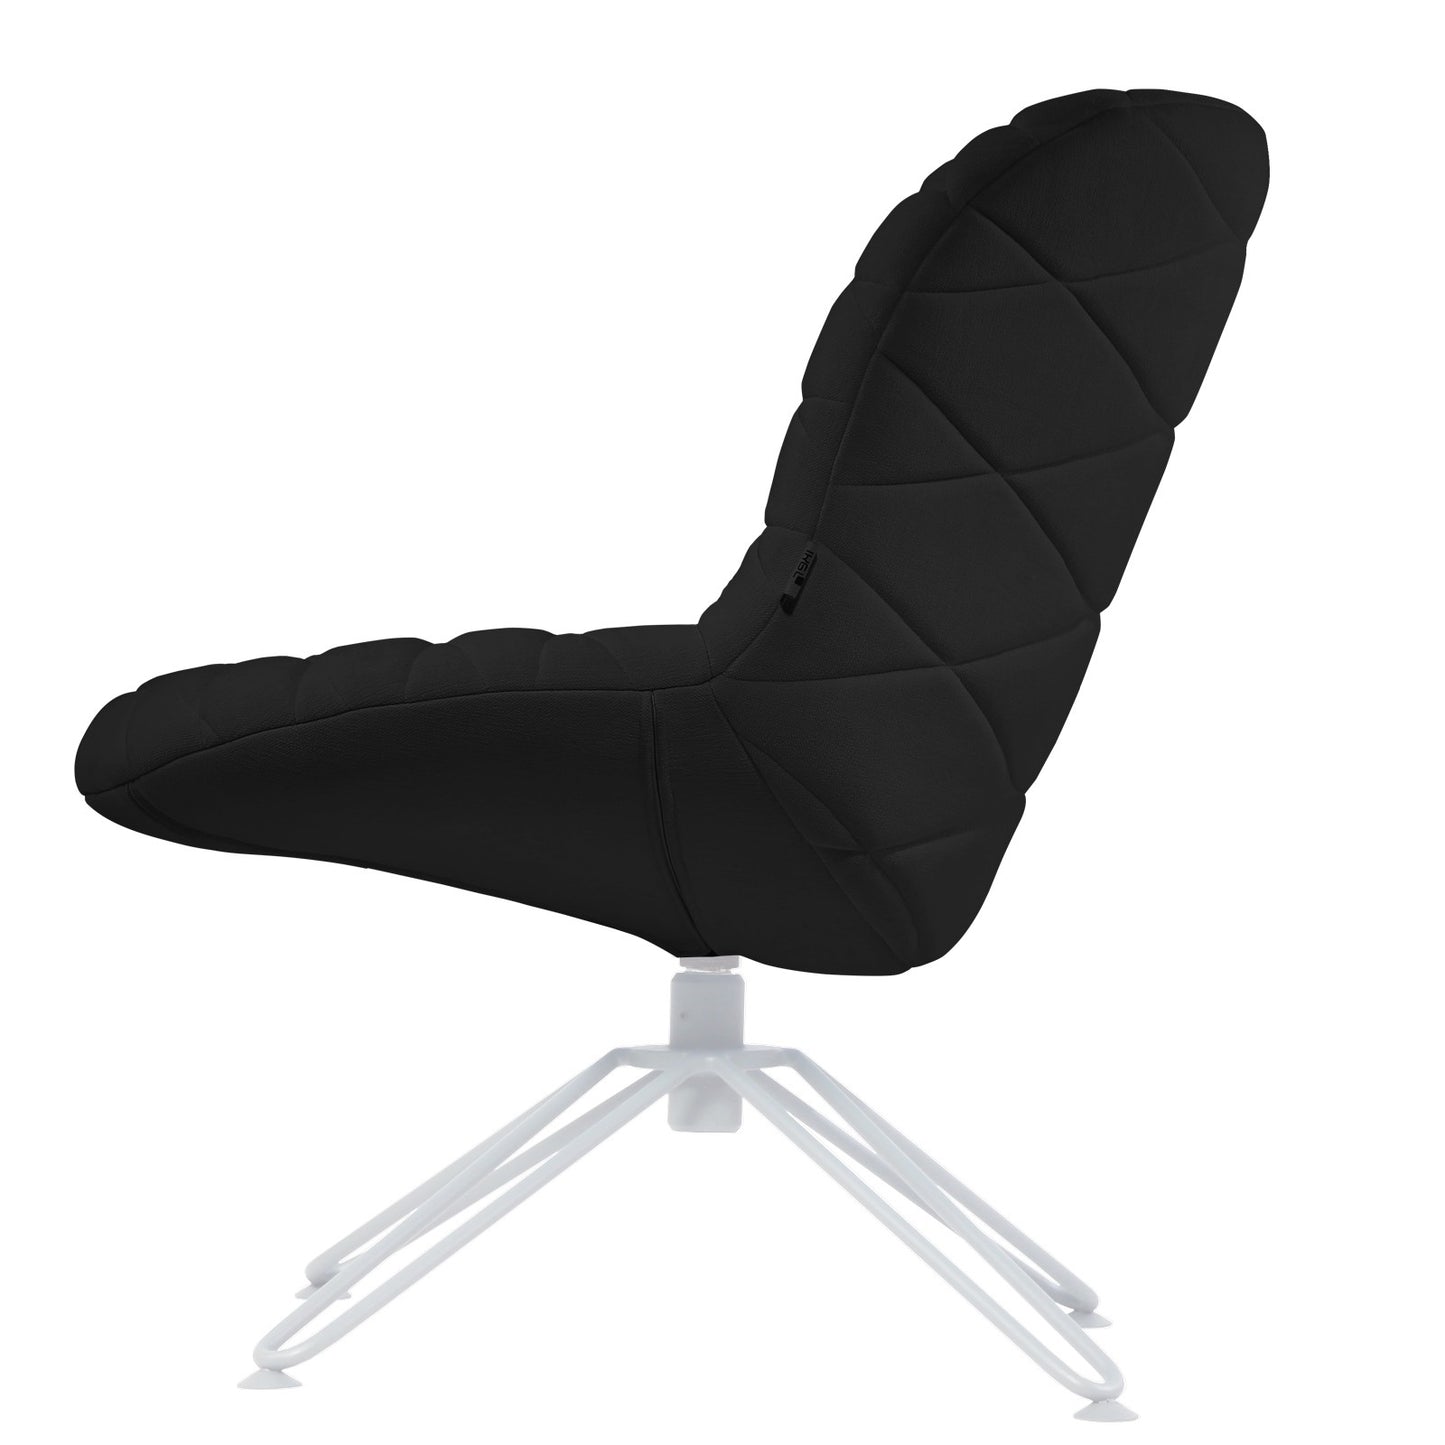 Lounge chair Mannequin Lounge 03 - Black